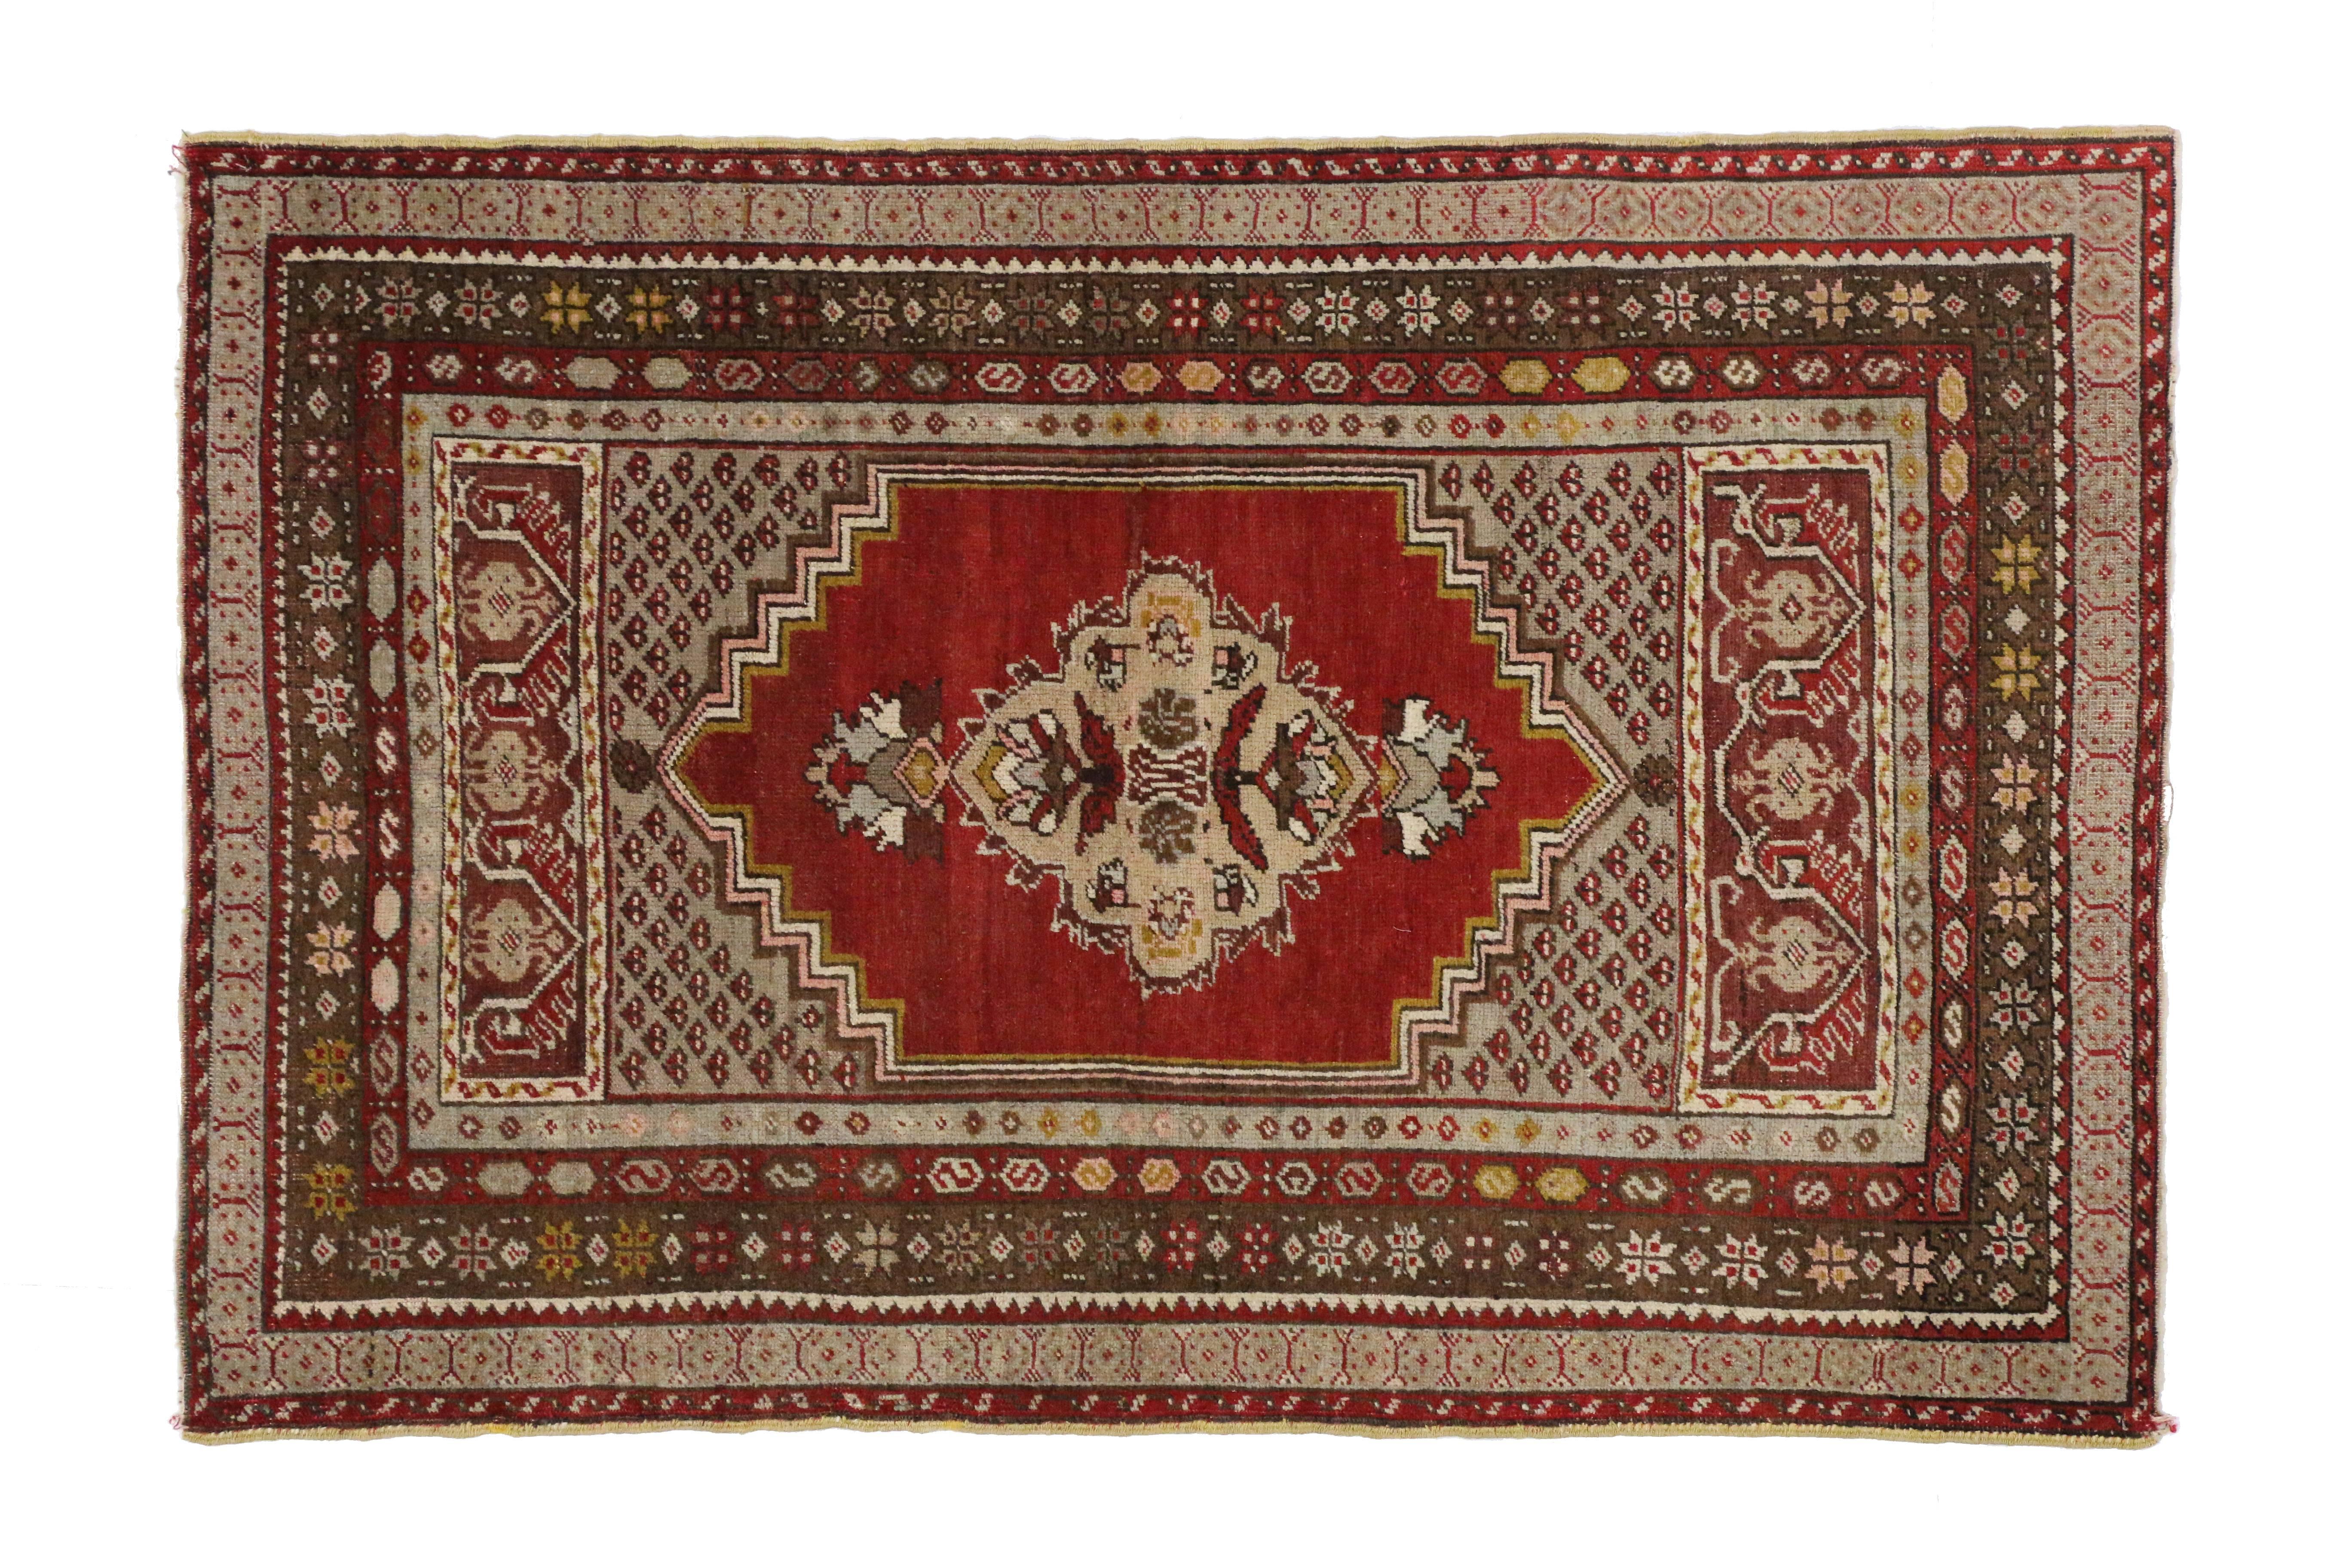 73851, vintage Turkish oushak rug, entry or foyer rug. This vintage Turkish Oushak rug features a modern traditional style. Immersed in Anatolian history and refined colors, this vintage Turkish Oushak rug combines simplicity with sophistication.